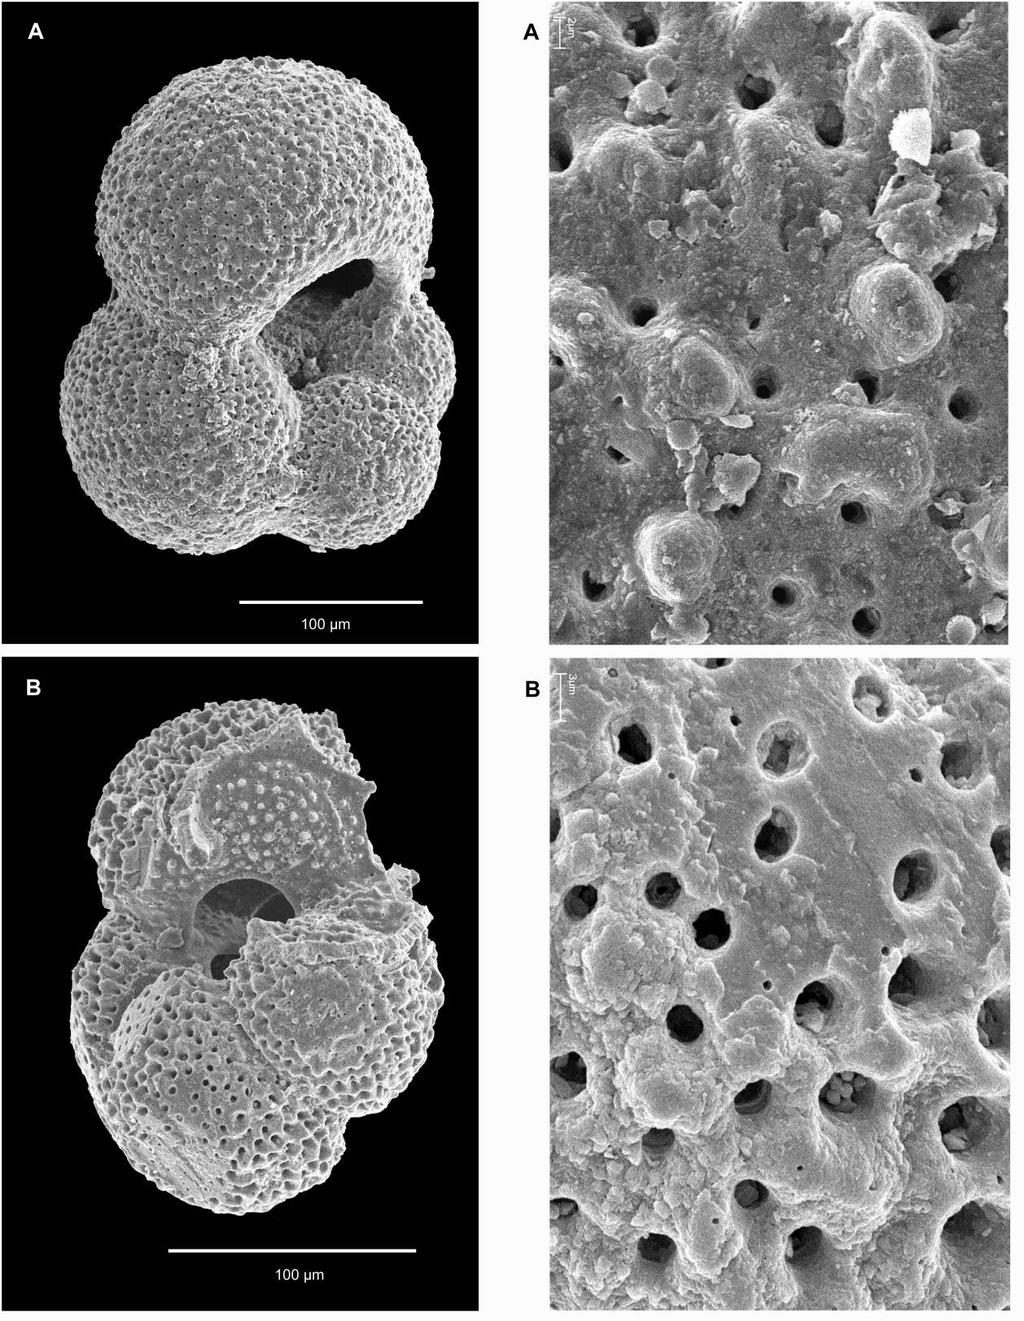 Fig. 5. Globigerina praebulloides from Gurlarn (A) and Stockhausen (B) and details of shells (right side).